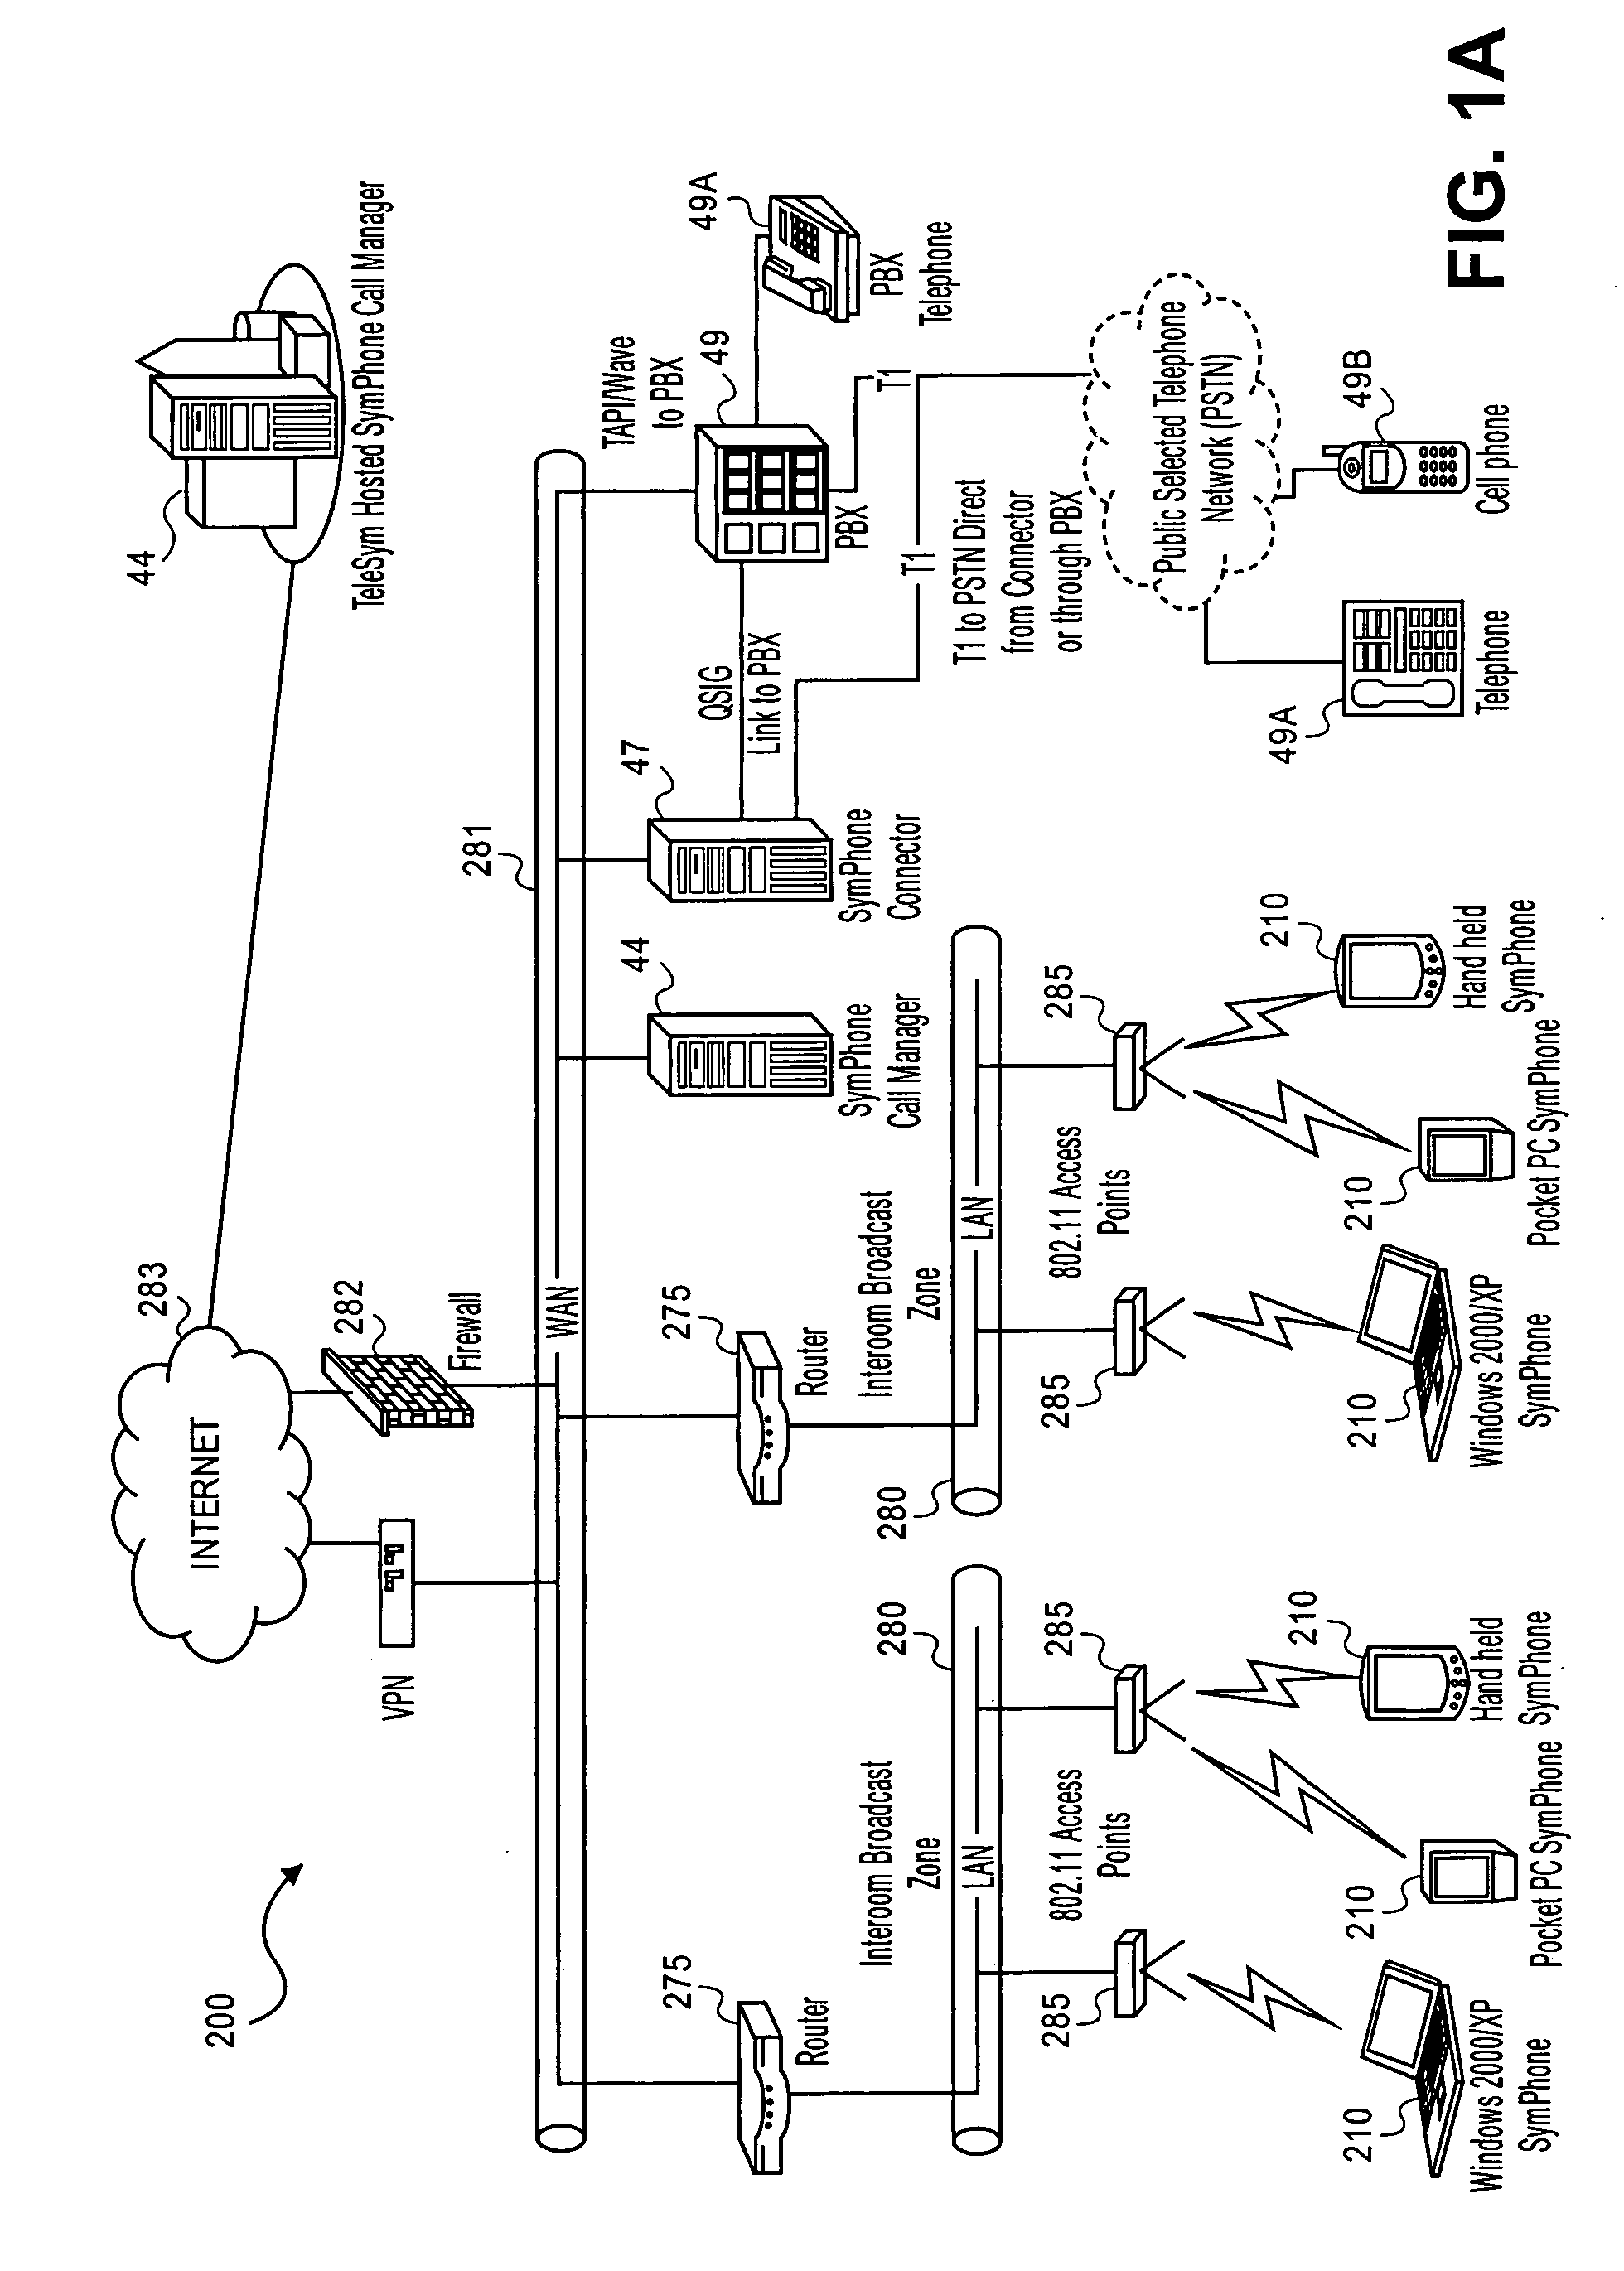 Group intercom, delayed playback, and ad-hoc based communications system and method